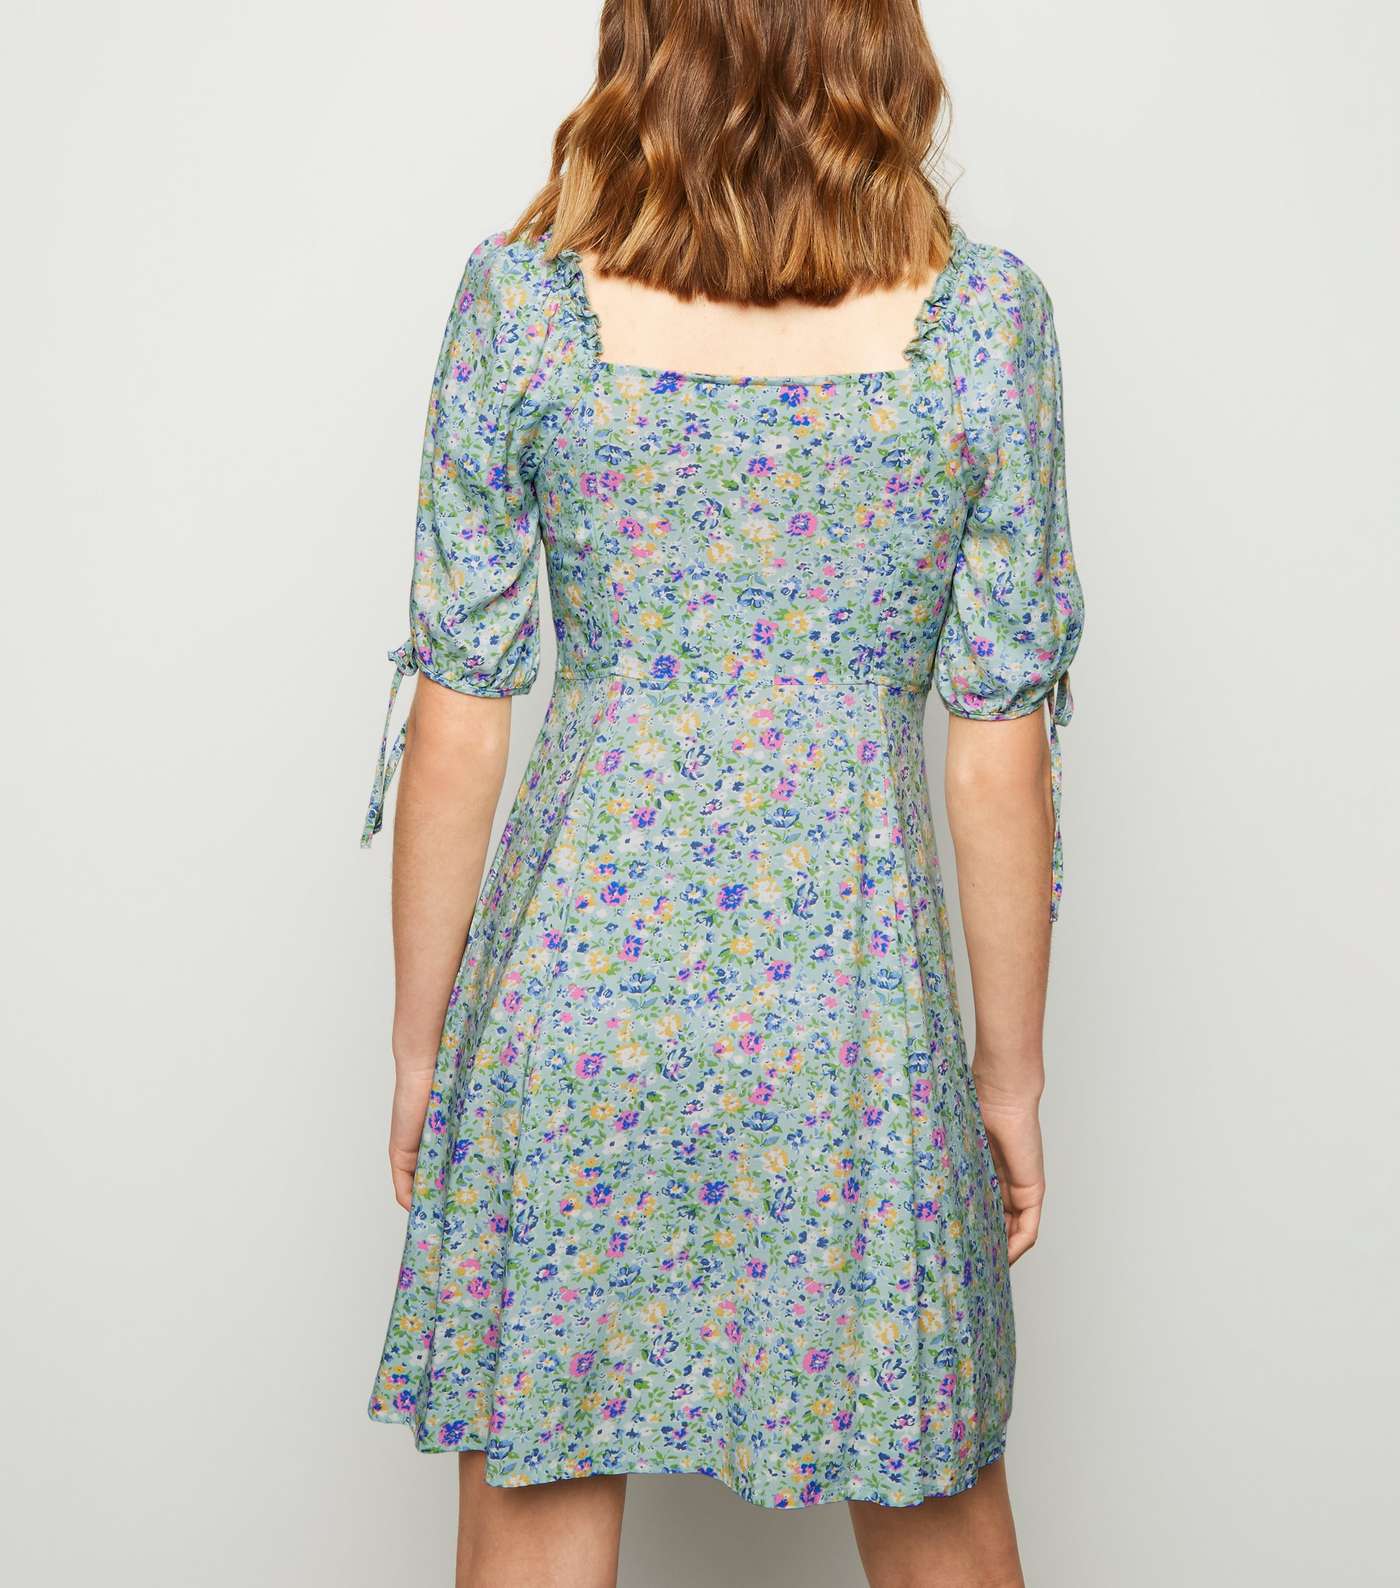 Green Ditsy Floral Lace Up Milkmaid Dress Image 3